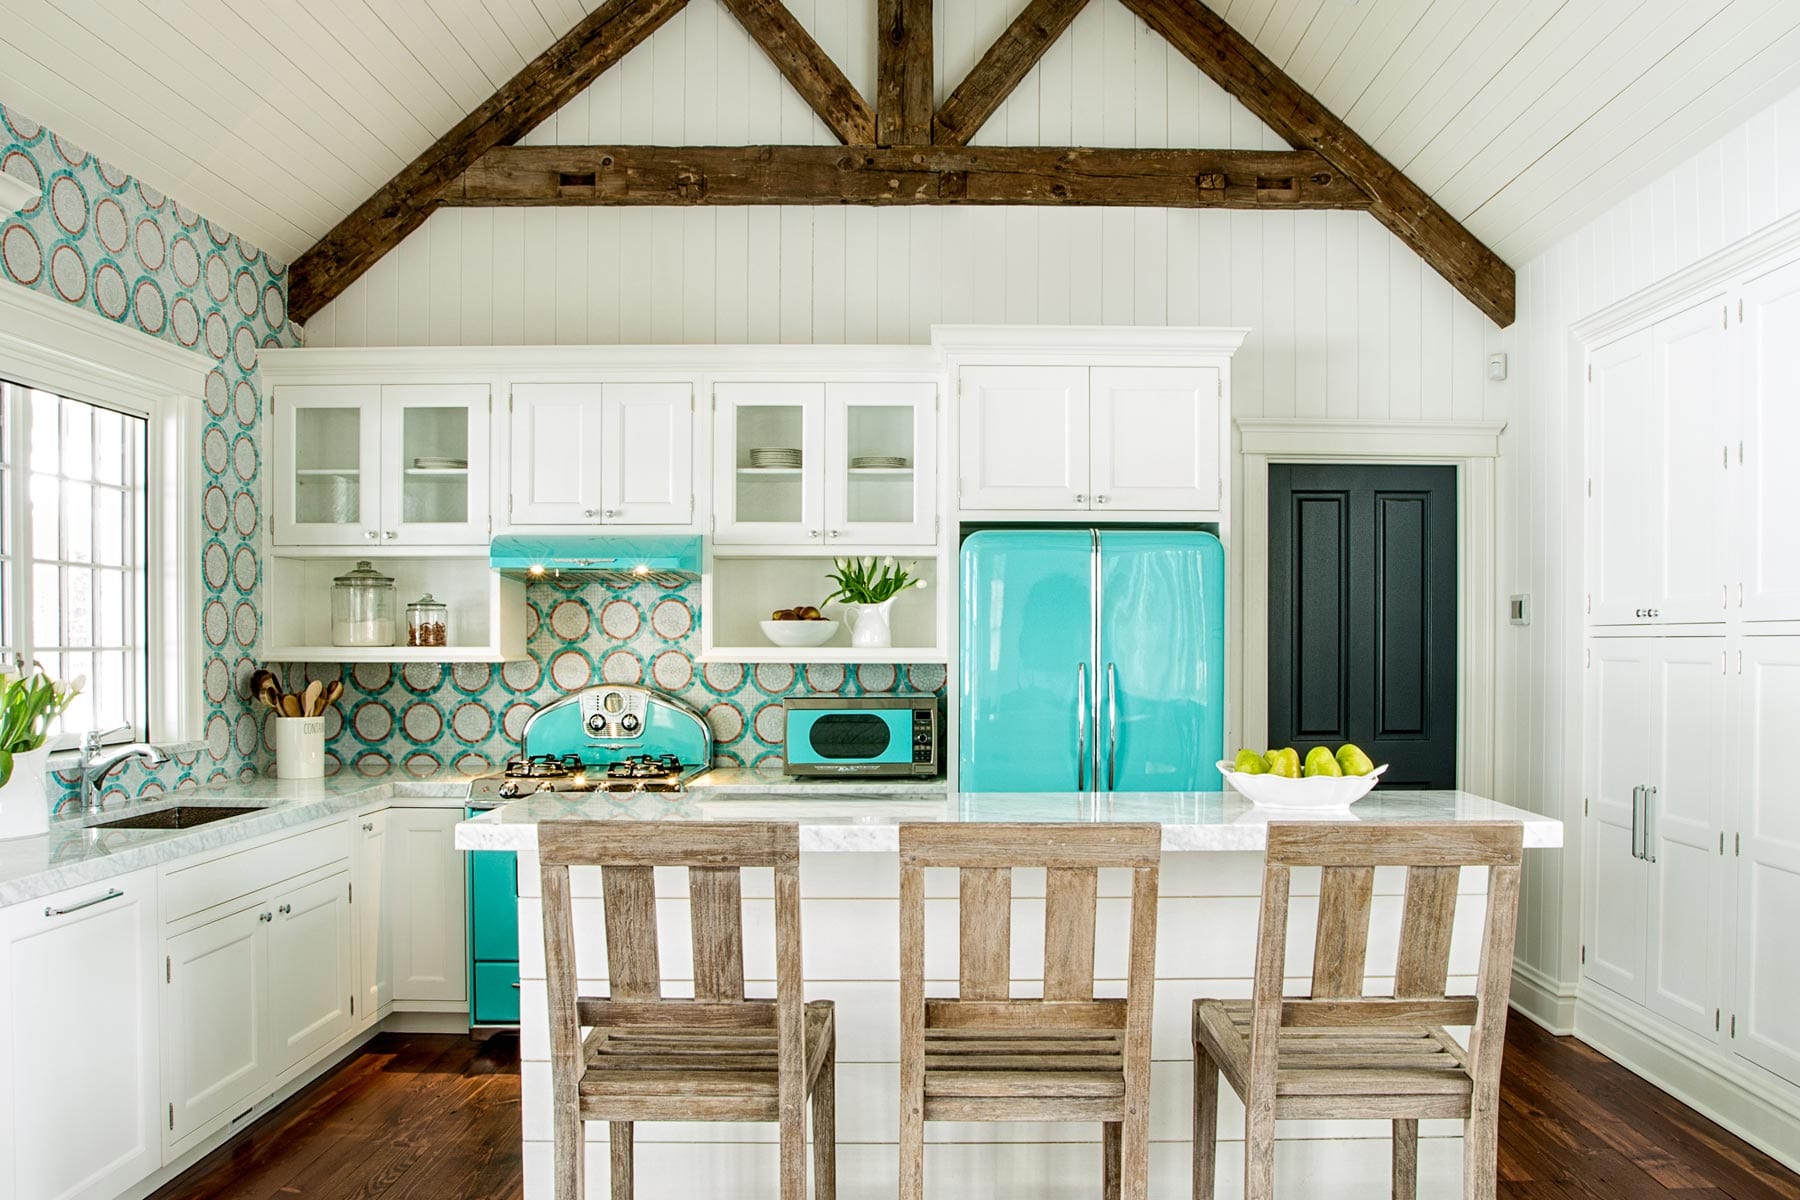 Cottage style kitchen remodel with teal and white accents